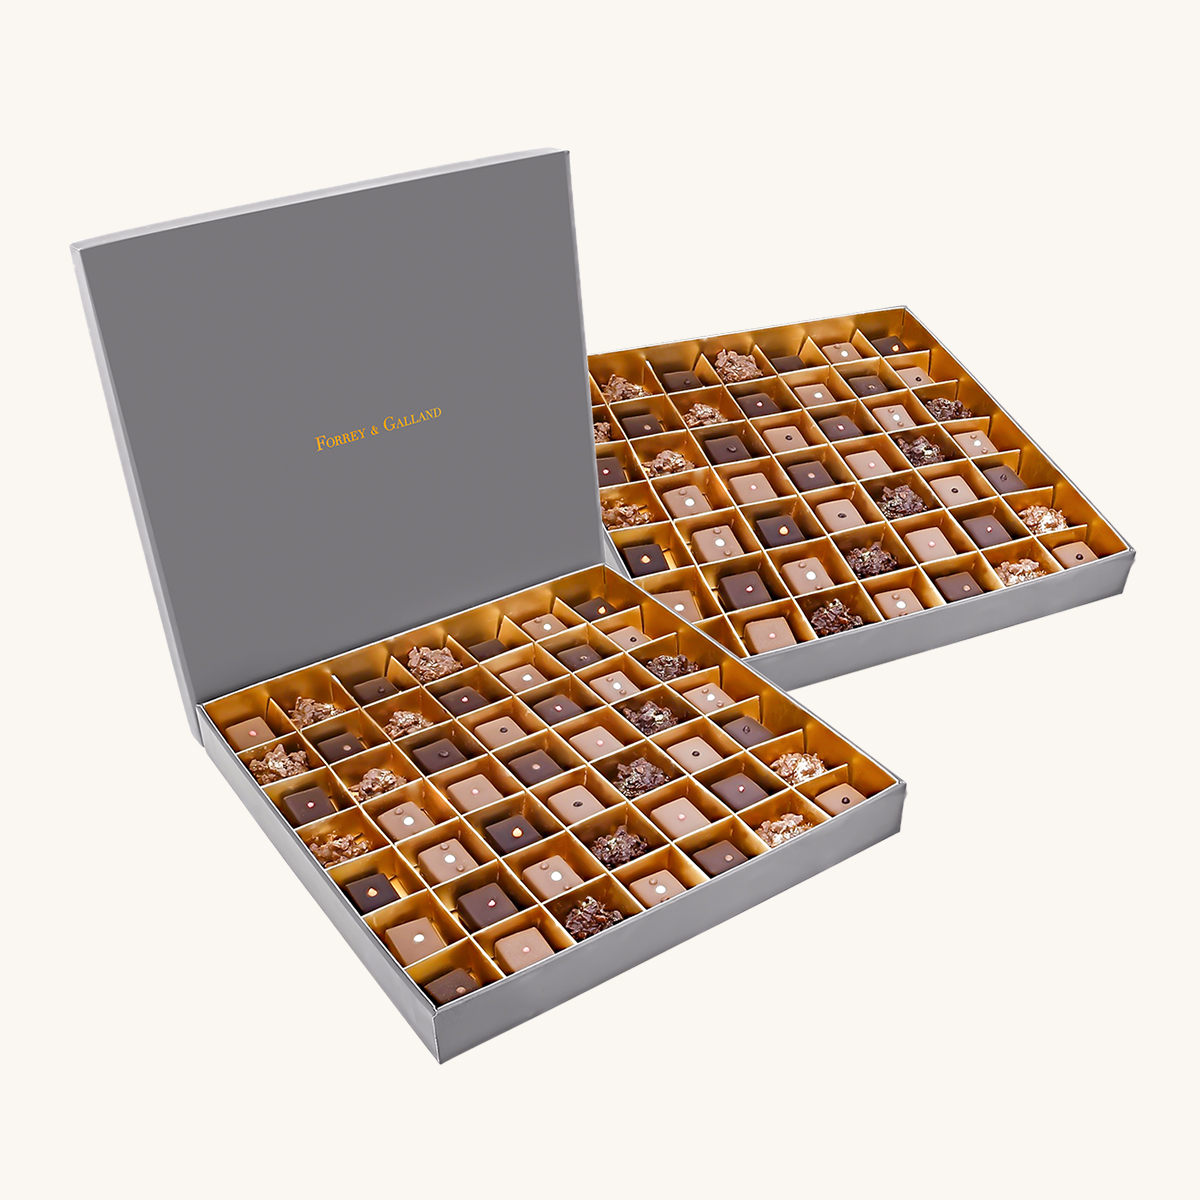 Forrey & Galland luxury chocolate box filled with 98 pieces of sugar free handmade chocolates.